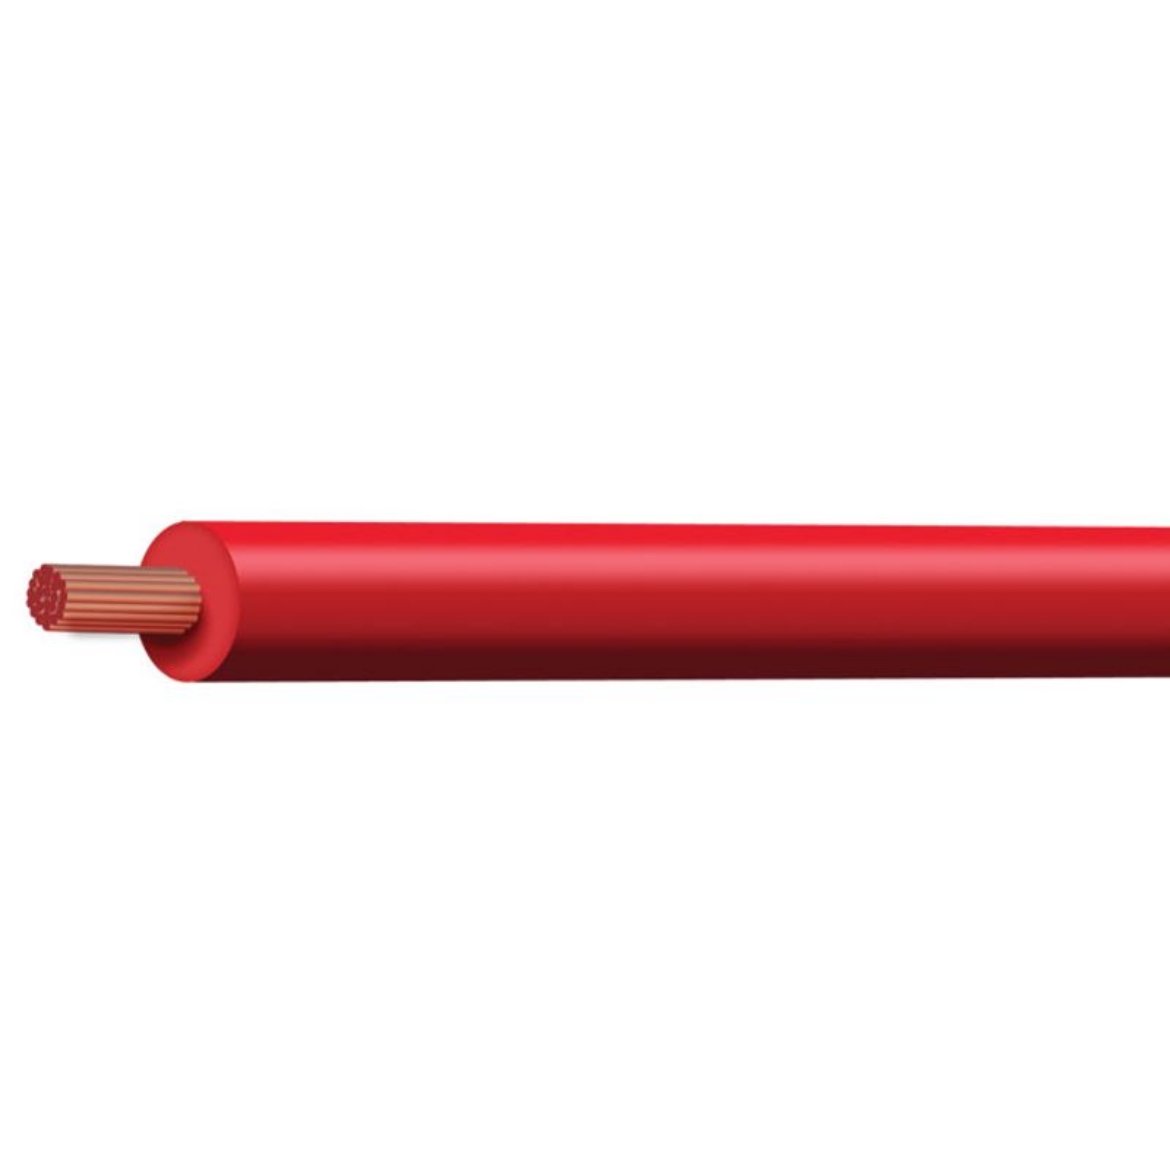 Picture of TYCAB SINGLE CORE CABLE BATTERY 0 B&S CROSS SECT 49.2MM SQ RATING 315A RED CUT - PER METER